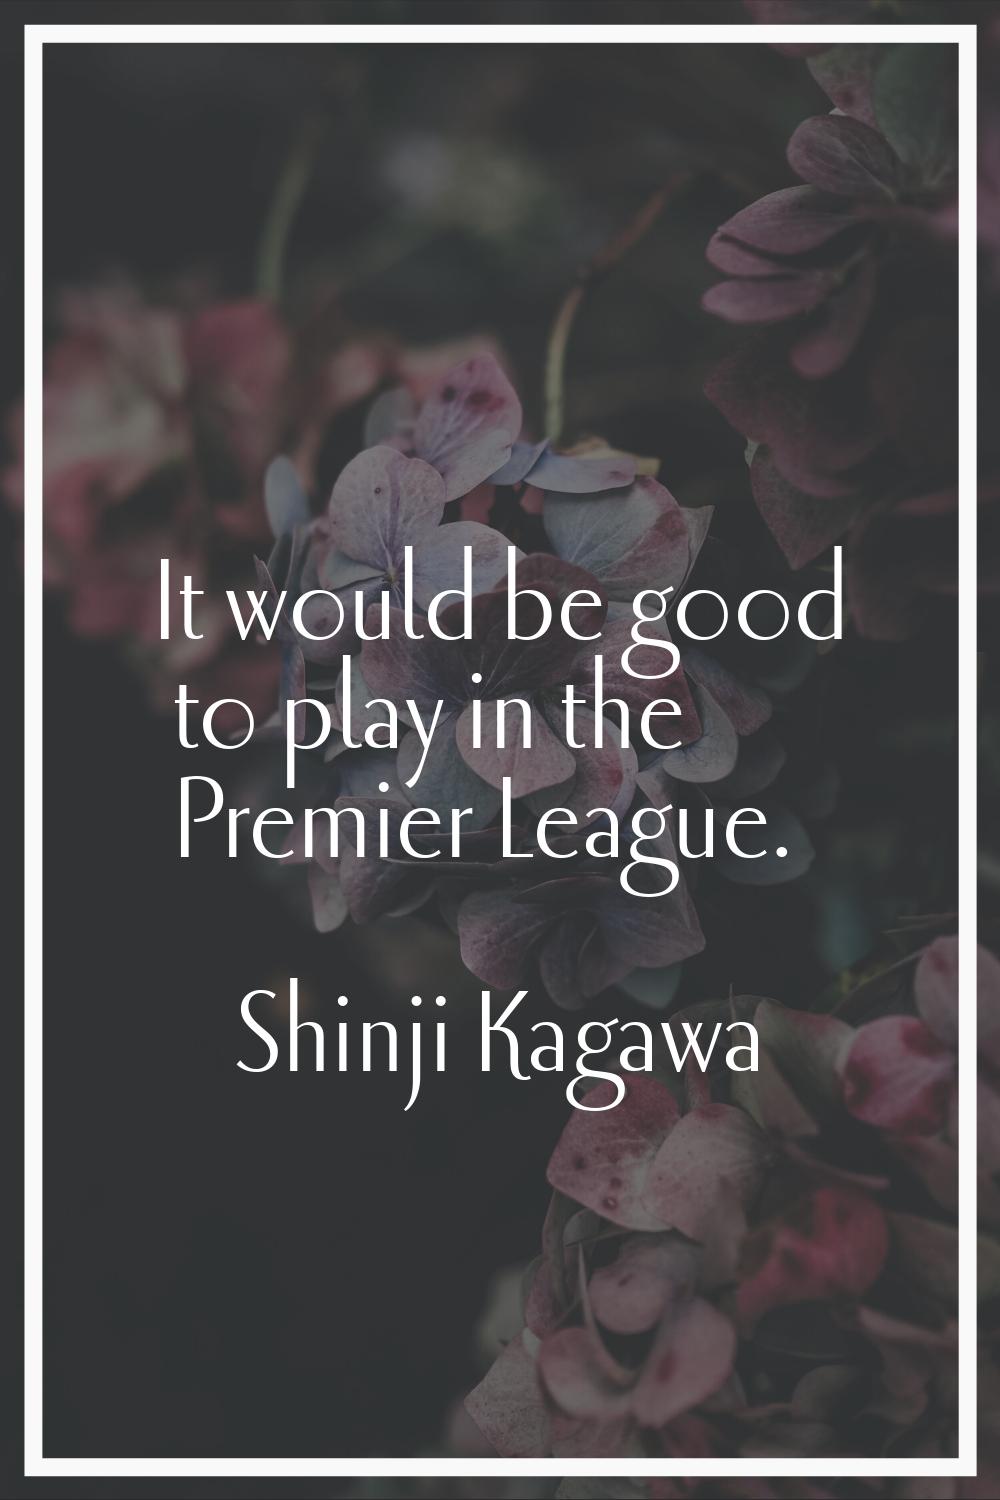 It would be good to play in the Premier League.